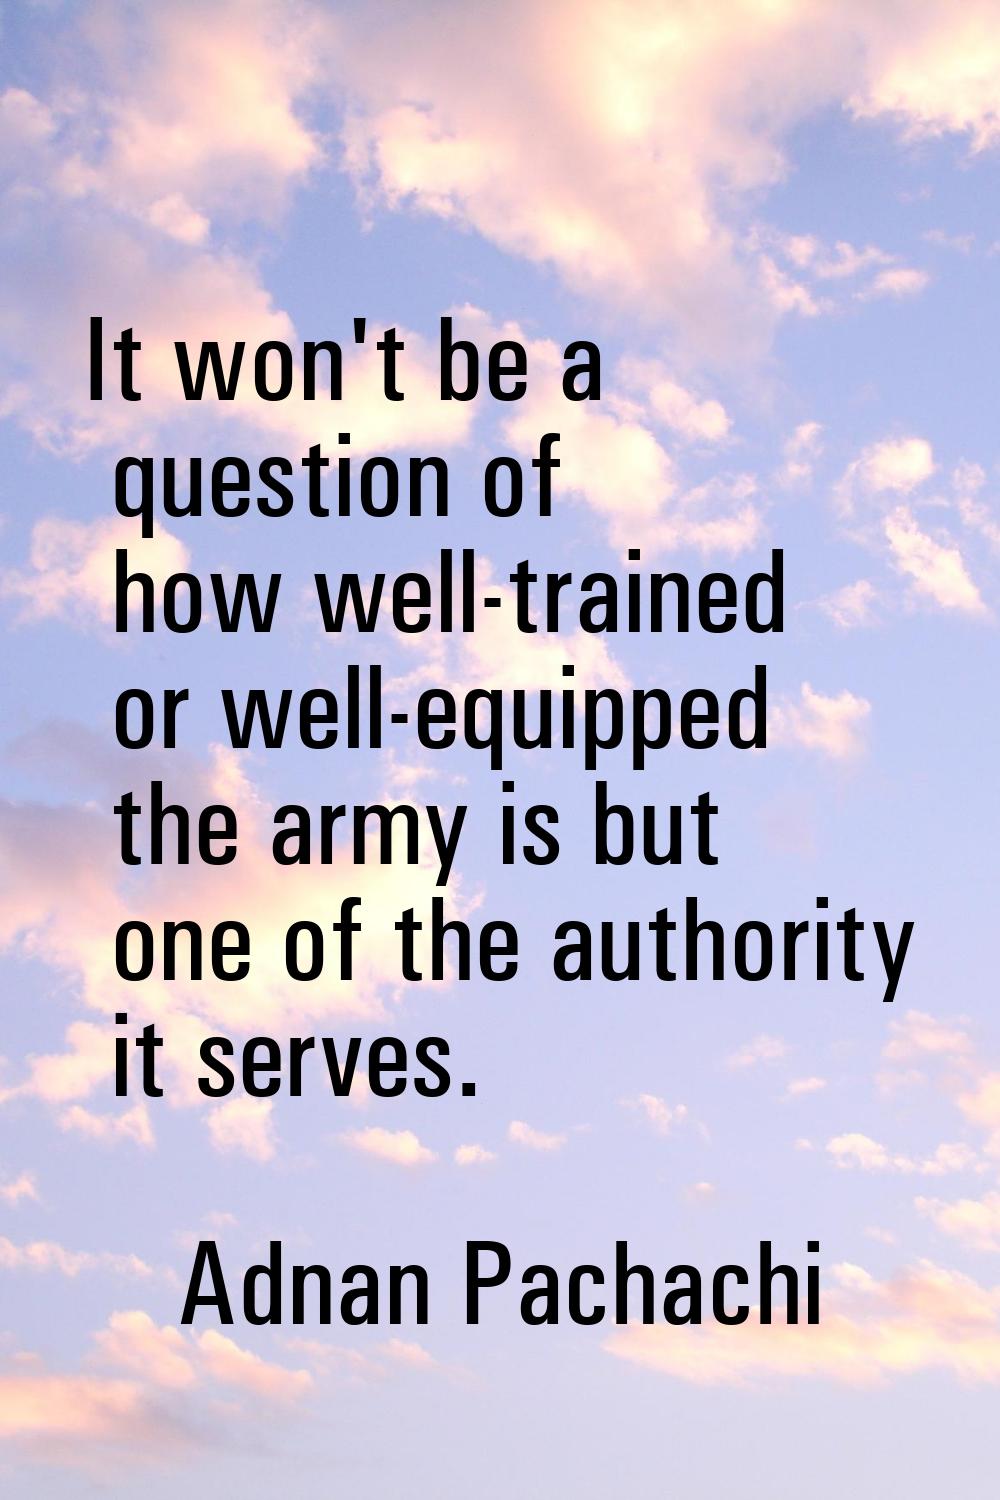 It won't be a question of how well-trained or well-equipped the army is but one of the authority it